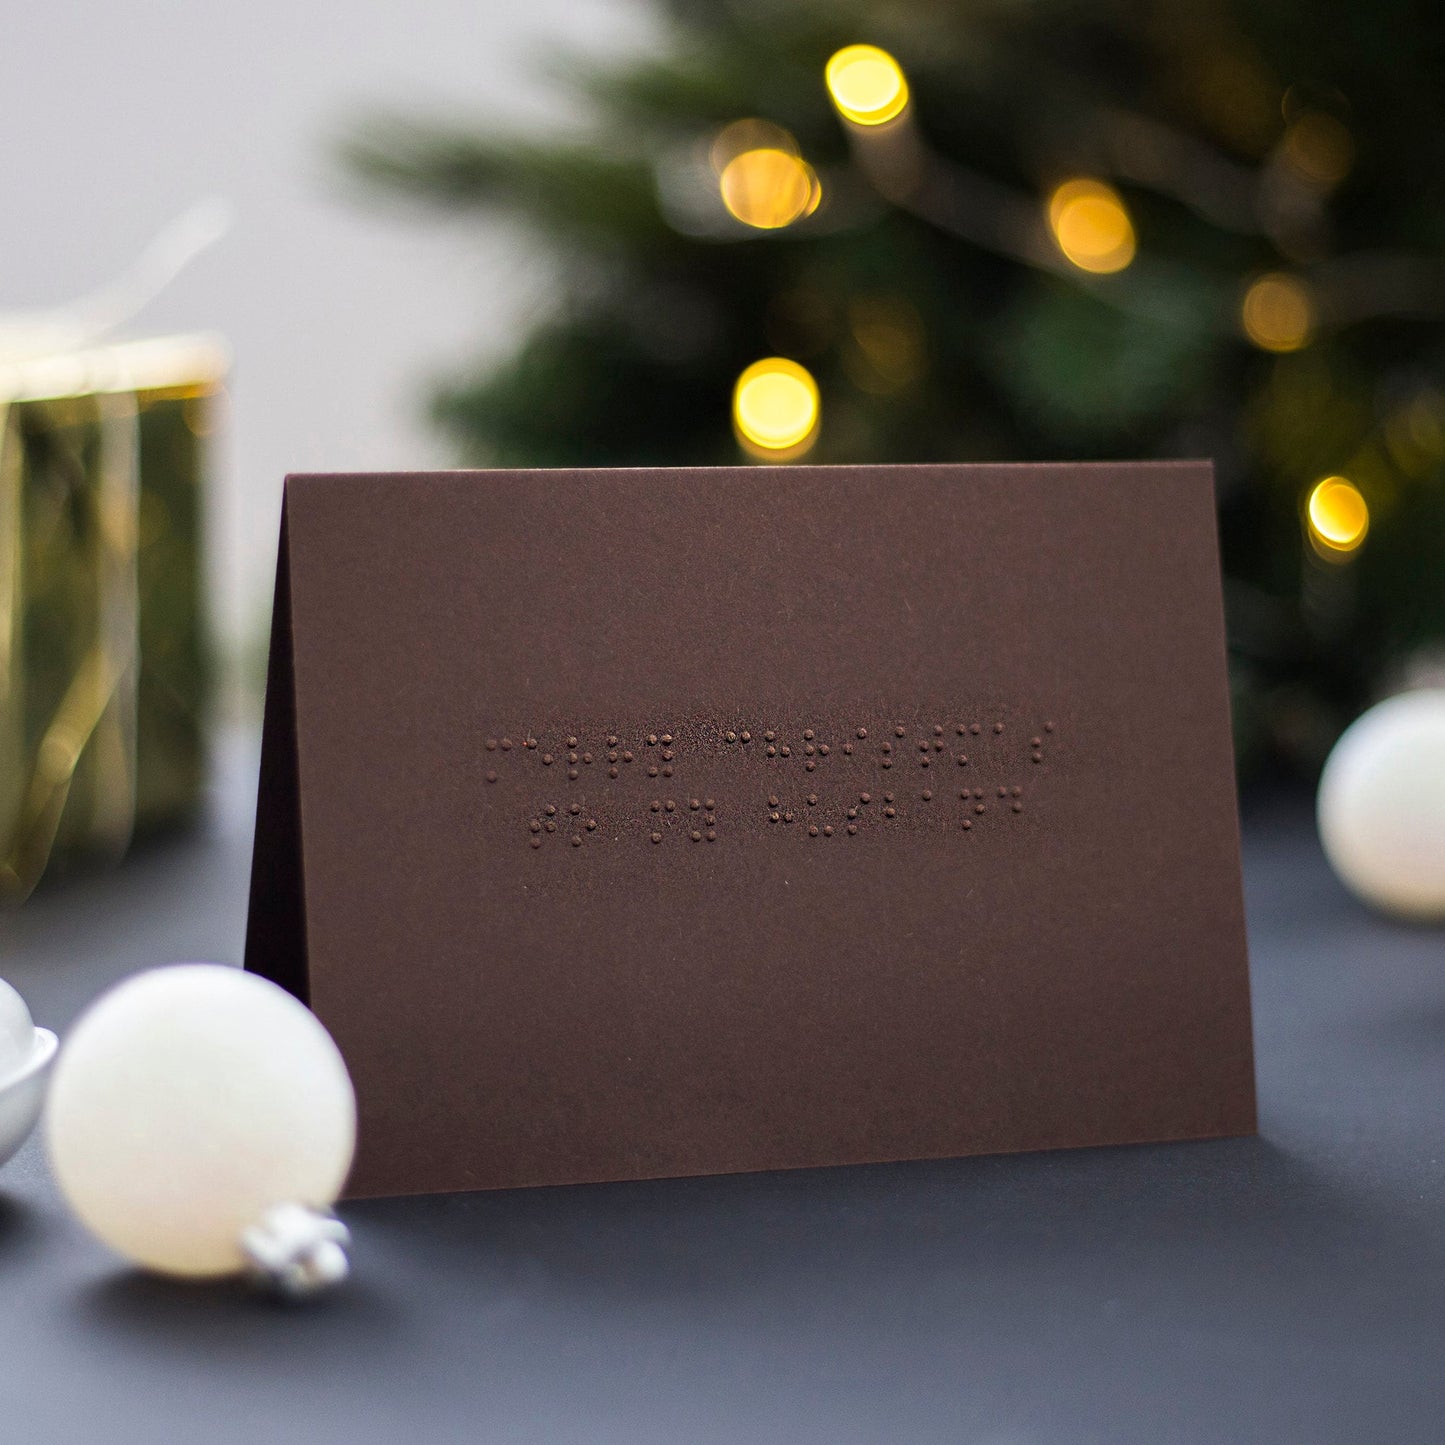 Braille Merry Christmas to my Husband/Wife/Best Friend Christmas Card - Personalised Braille Christmas Card